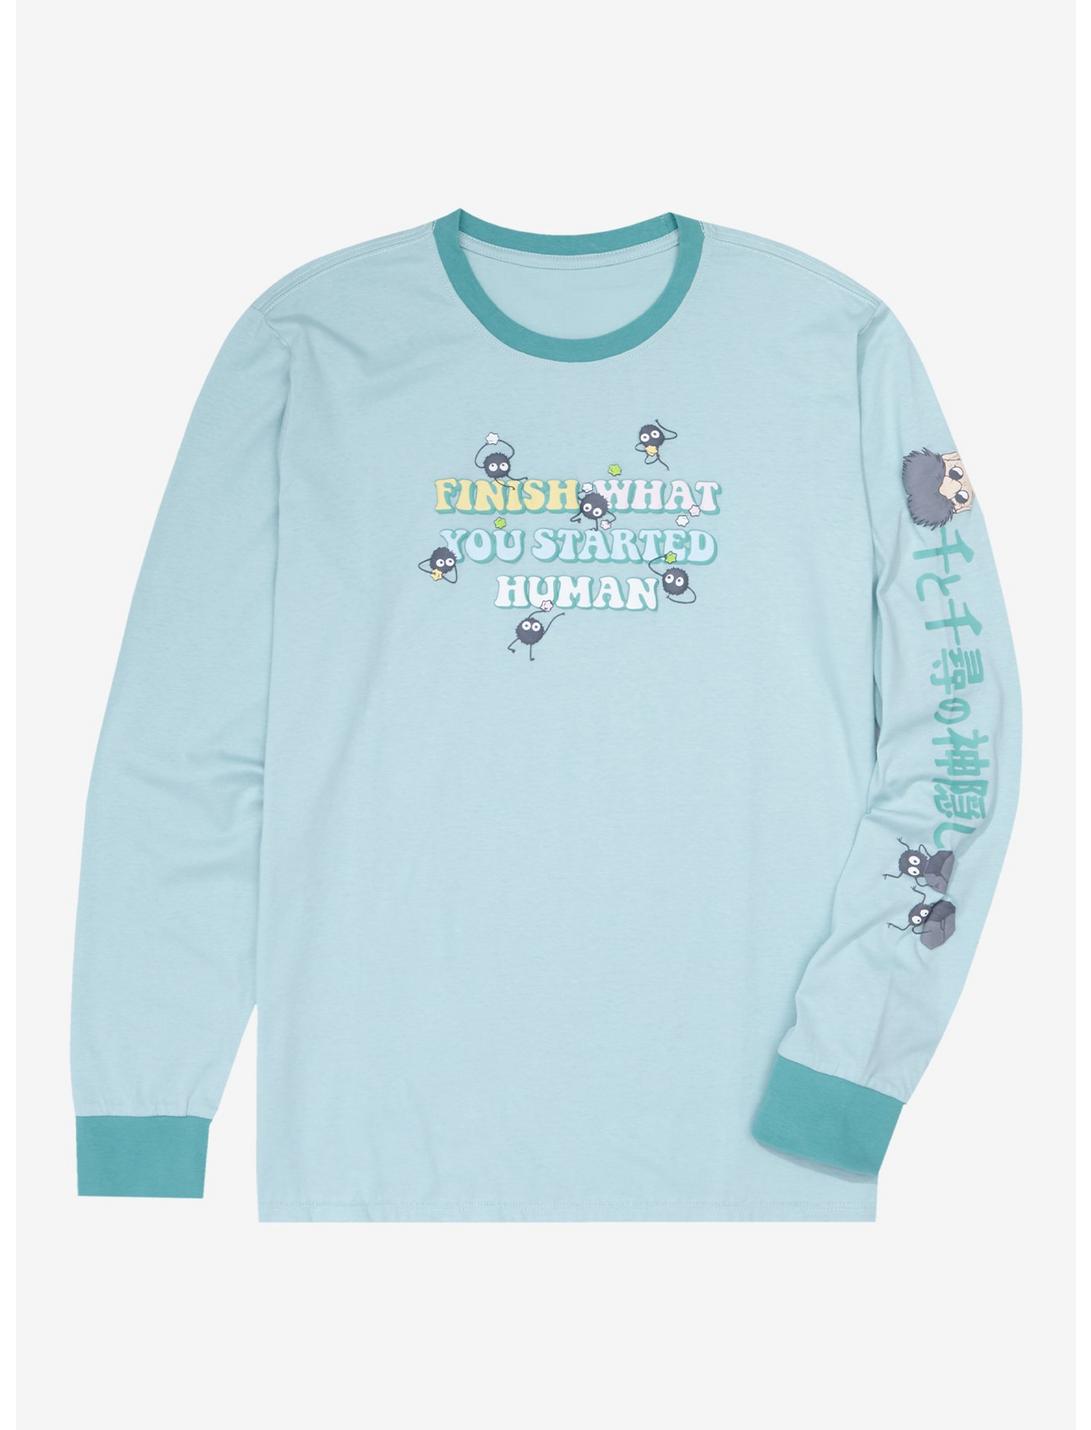 Studio Ghibli Spirited Away Finish What You Started Long Sleeve T-Shirt - BoxLunch Exclusive, LIGHT BLUE, hi-res